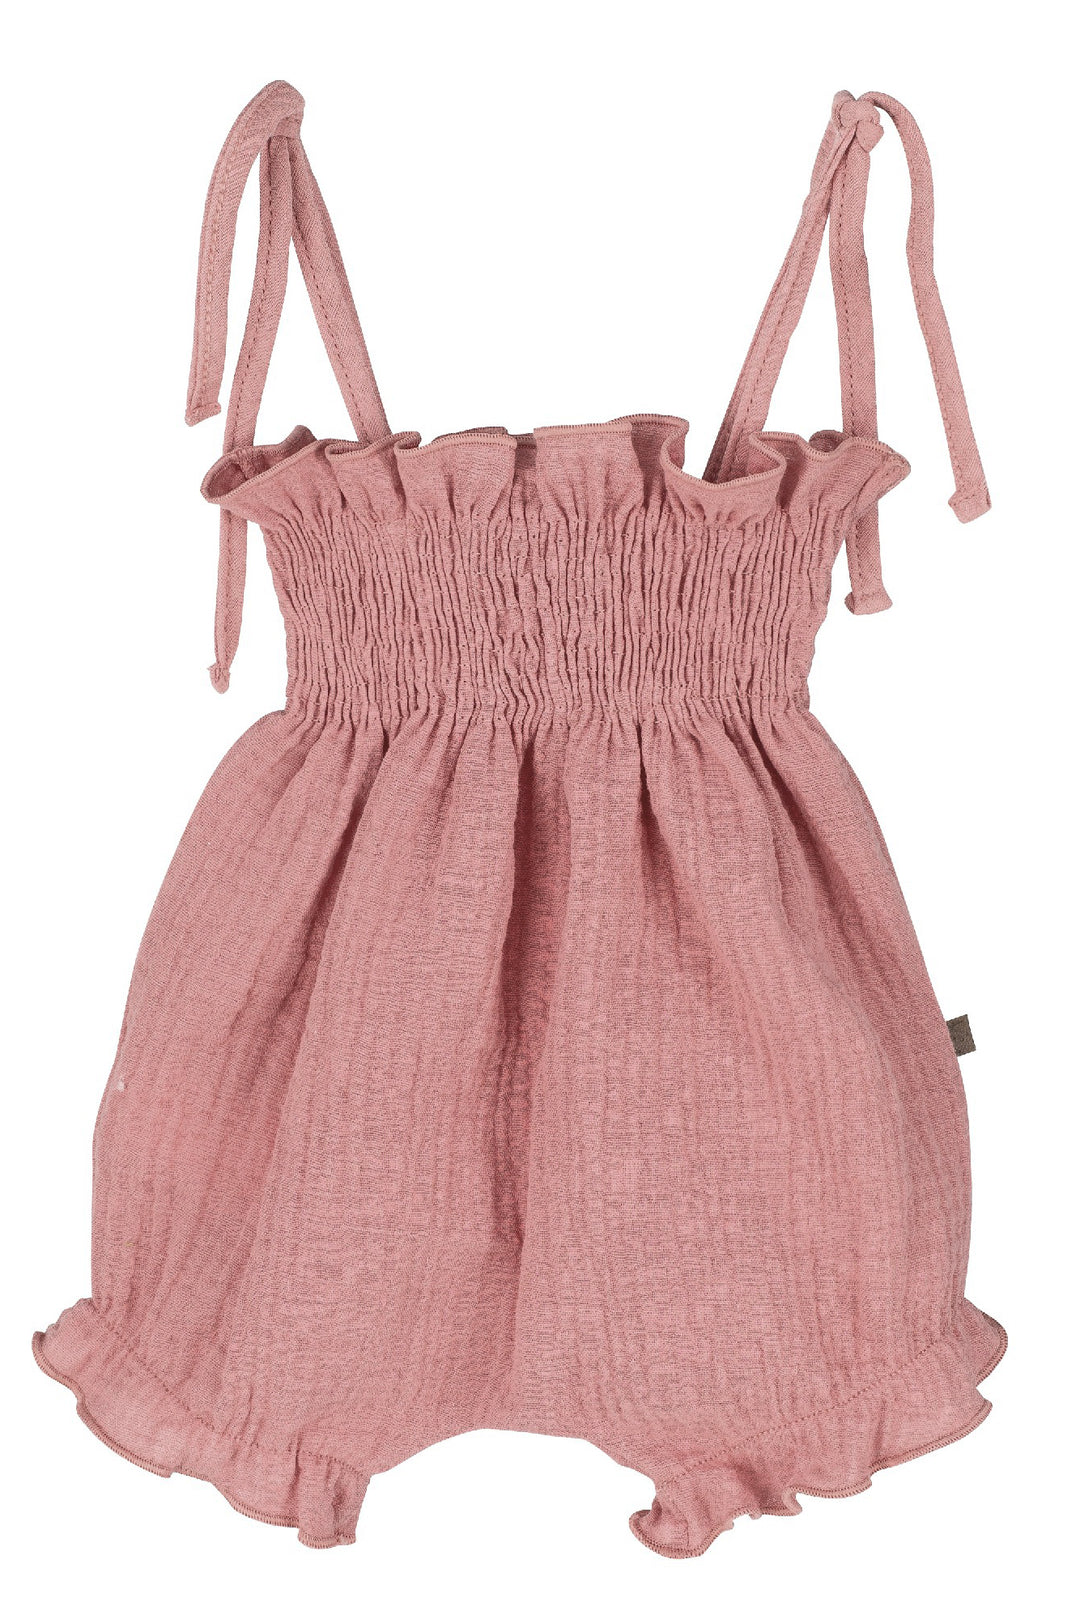 Calamaro "Addie" Rose Pink Cheesecloth Jumpsuit | Millie and John